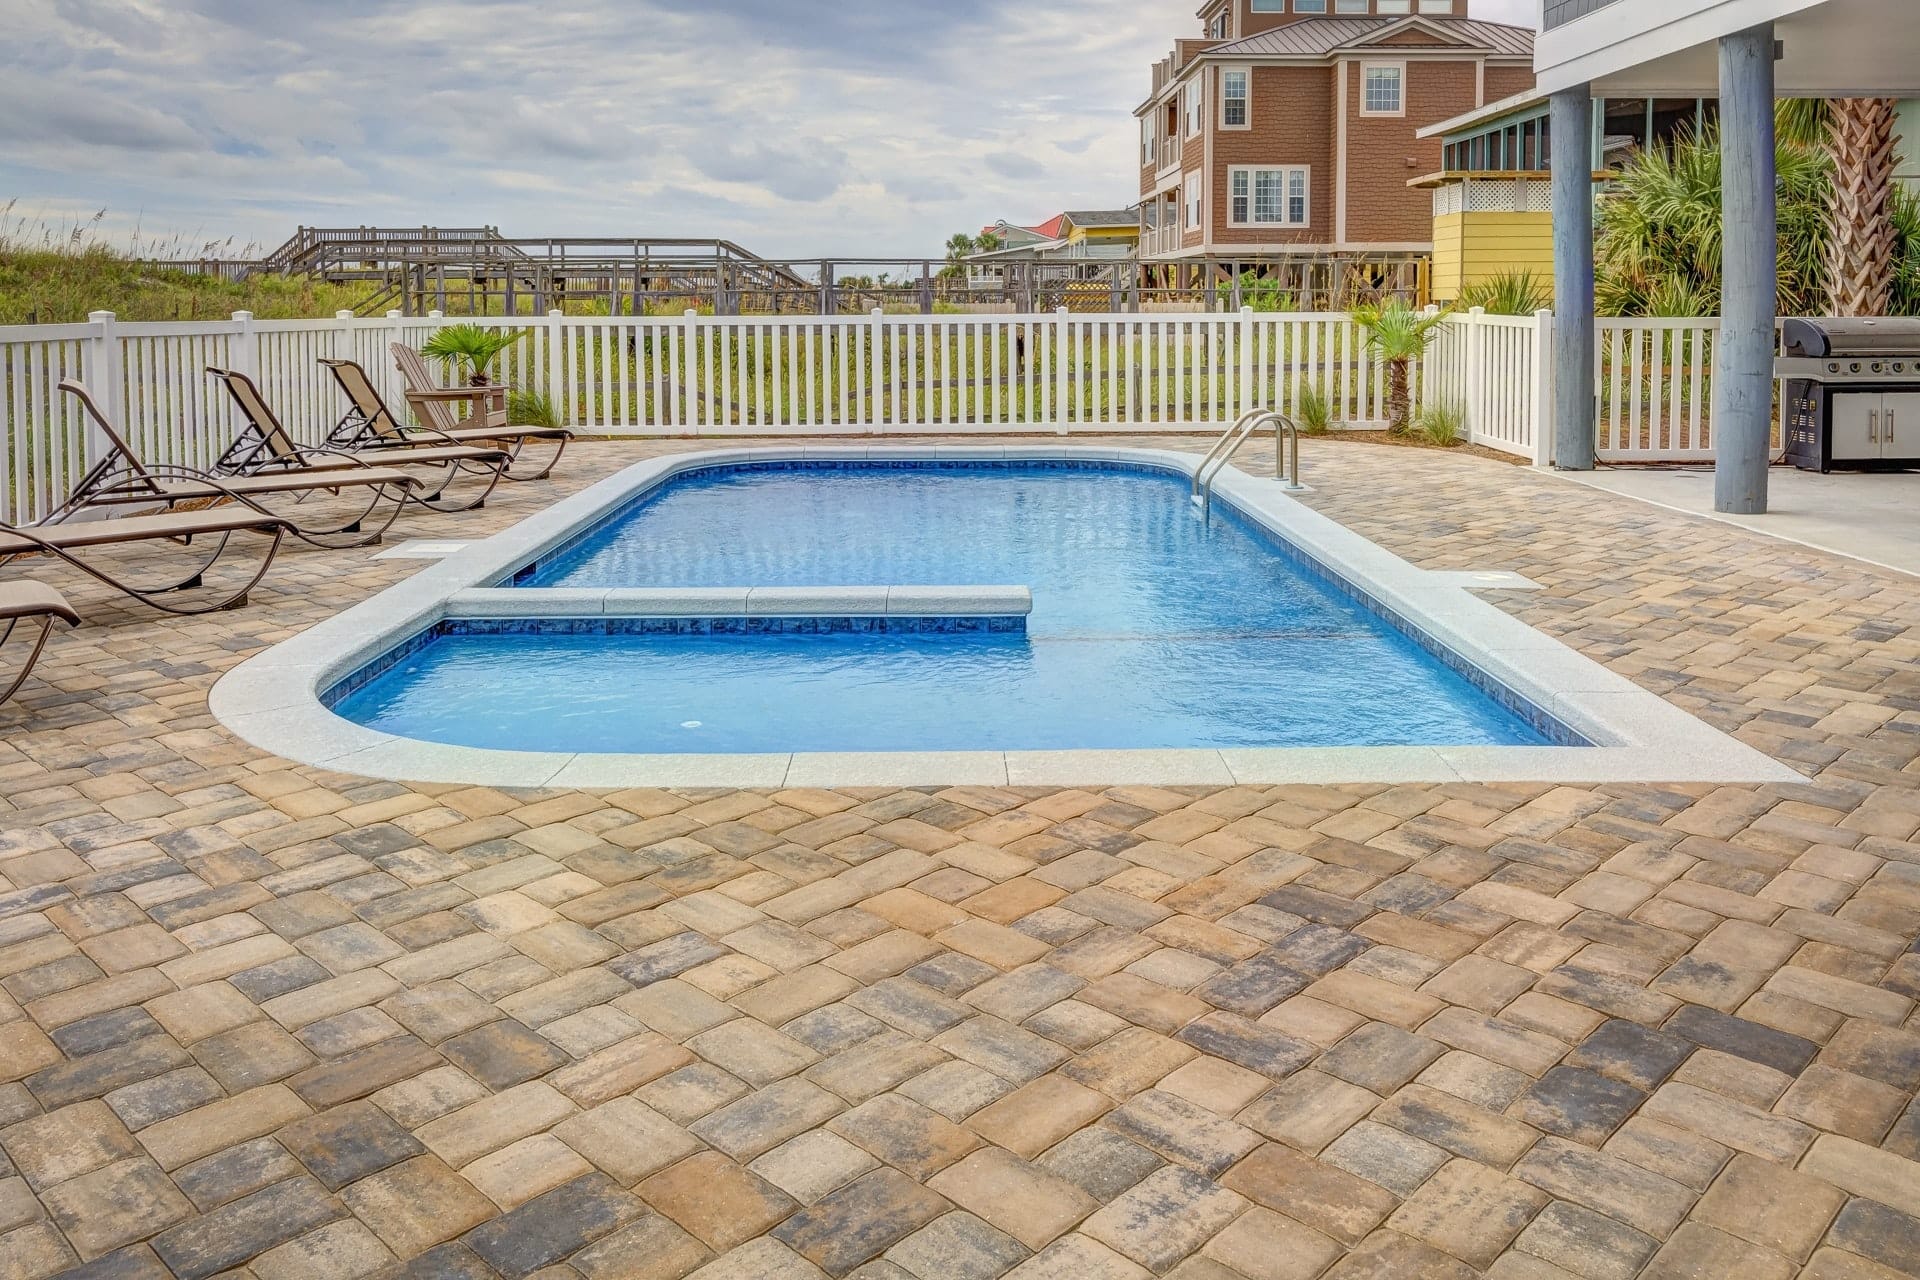 Tips to Maintain Your Home Pool